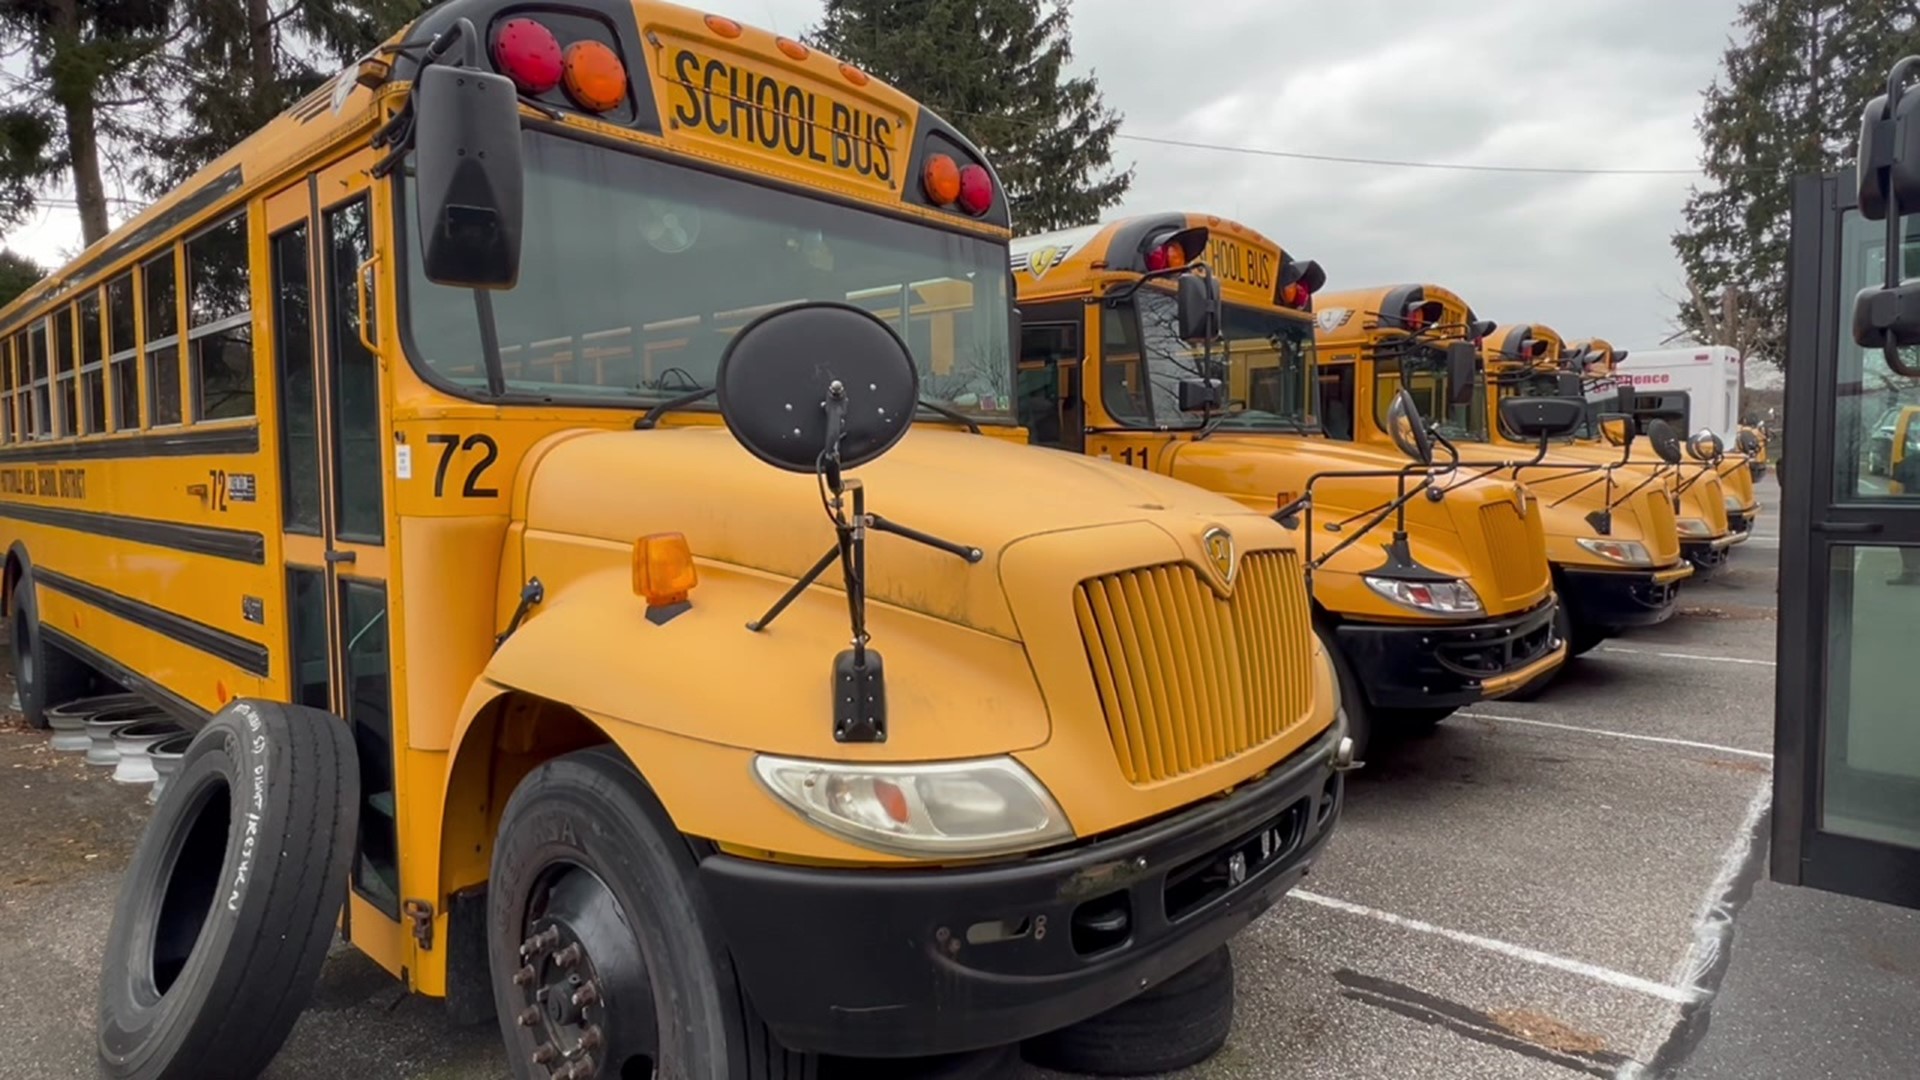 Internet connection remains an issue in rural Pennsylvania. One school district in Schuylkill County is thinking outside the bus to keep kids connected.